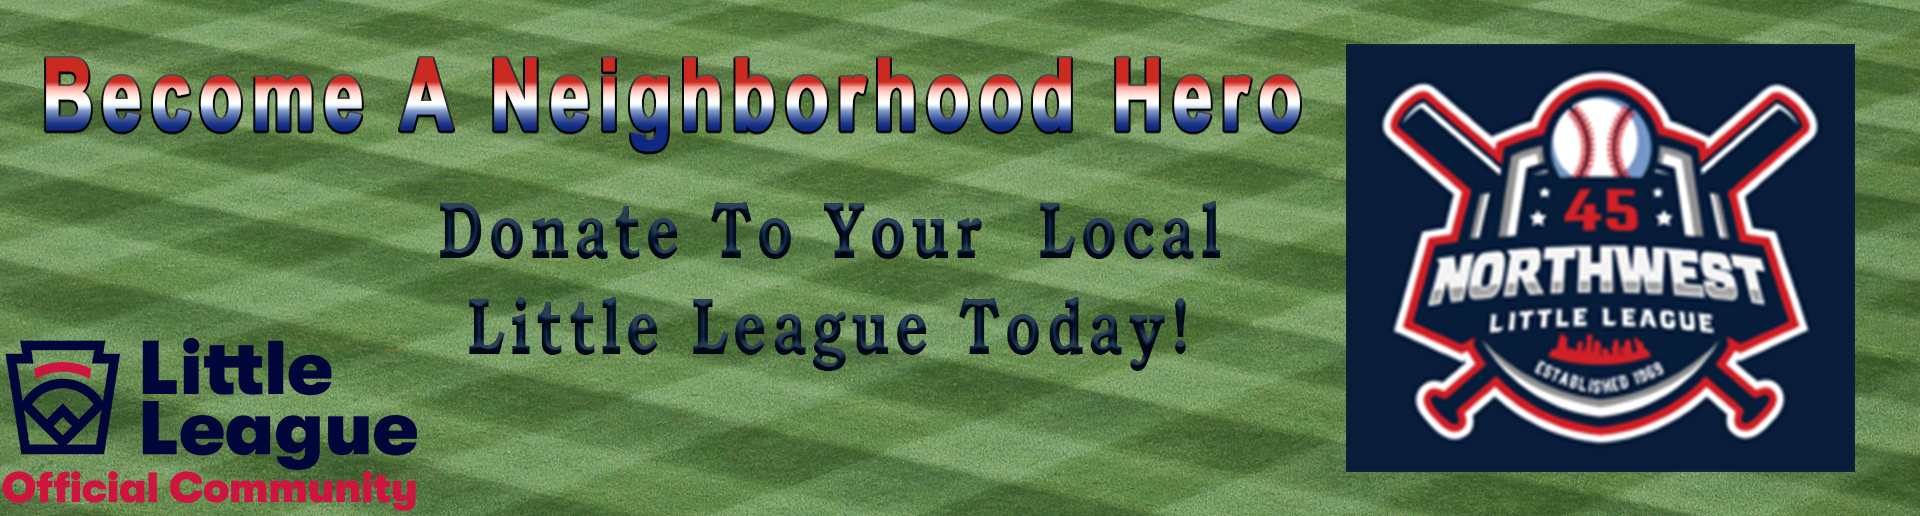 Donate To Your Local Little League Today!